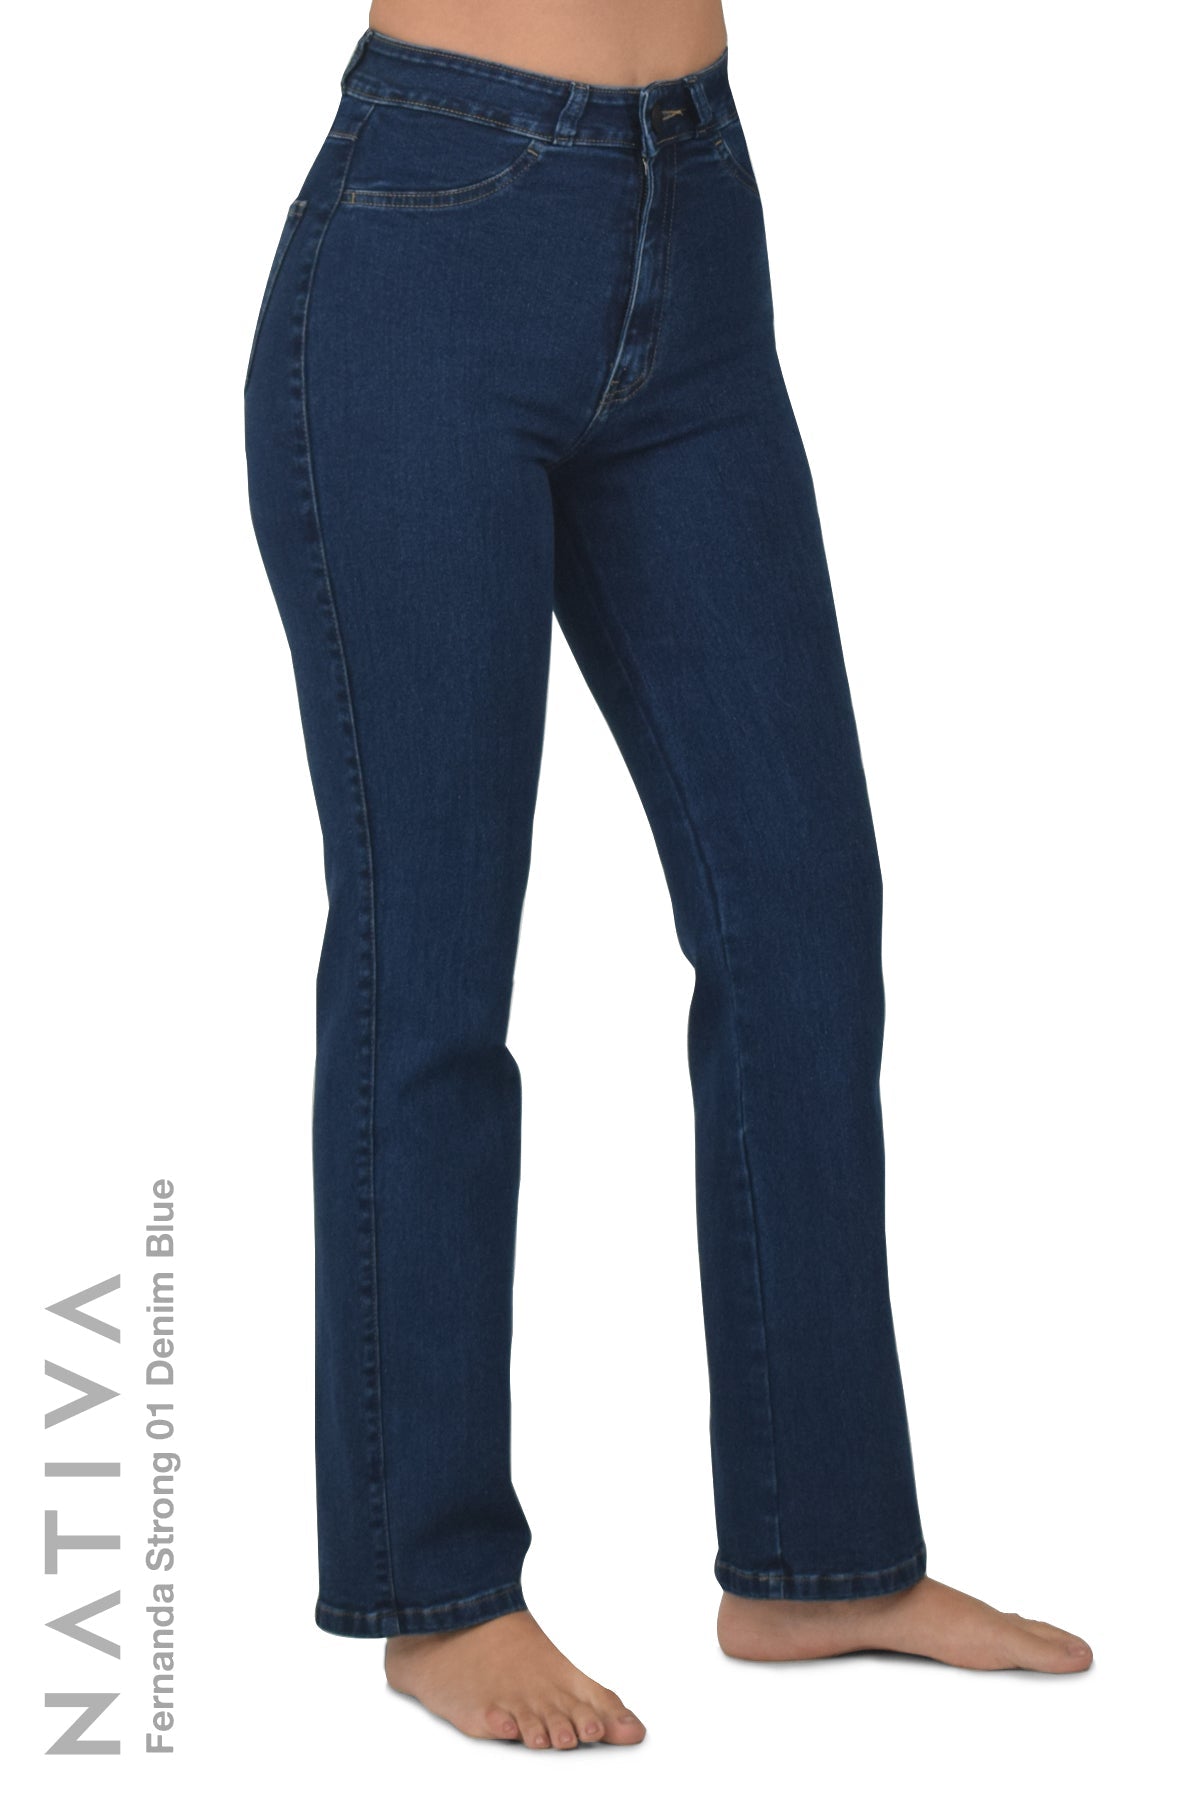 NATIVA, STRETCH JEANS. FERNANDA STRONG 01 DENIM BLUE, High-Rise Fitted  Classic Straight Leg Jeans ESFD (Extreme Stretch Flattering Denim) Fabric  Ideal